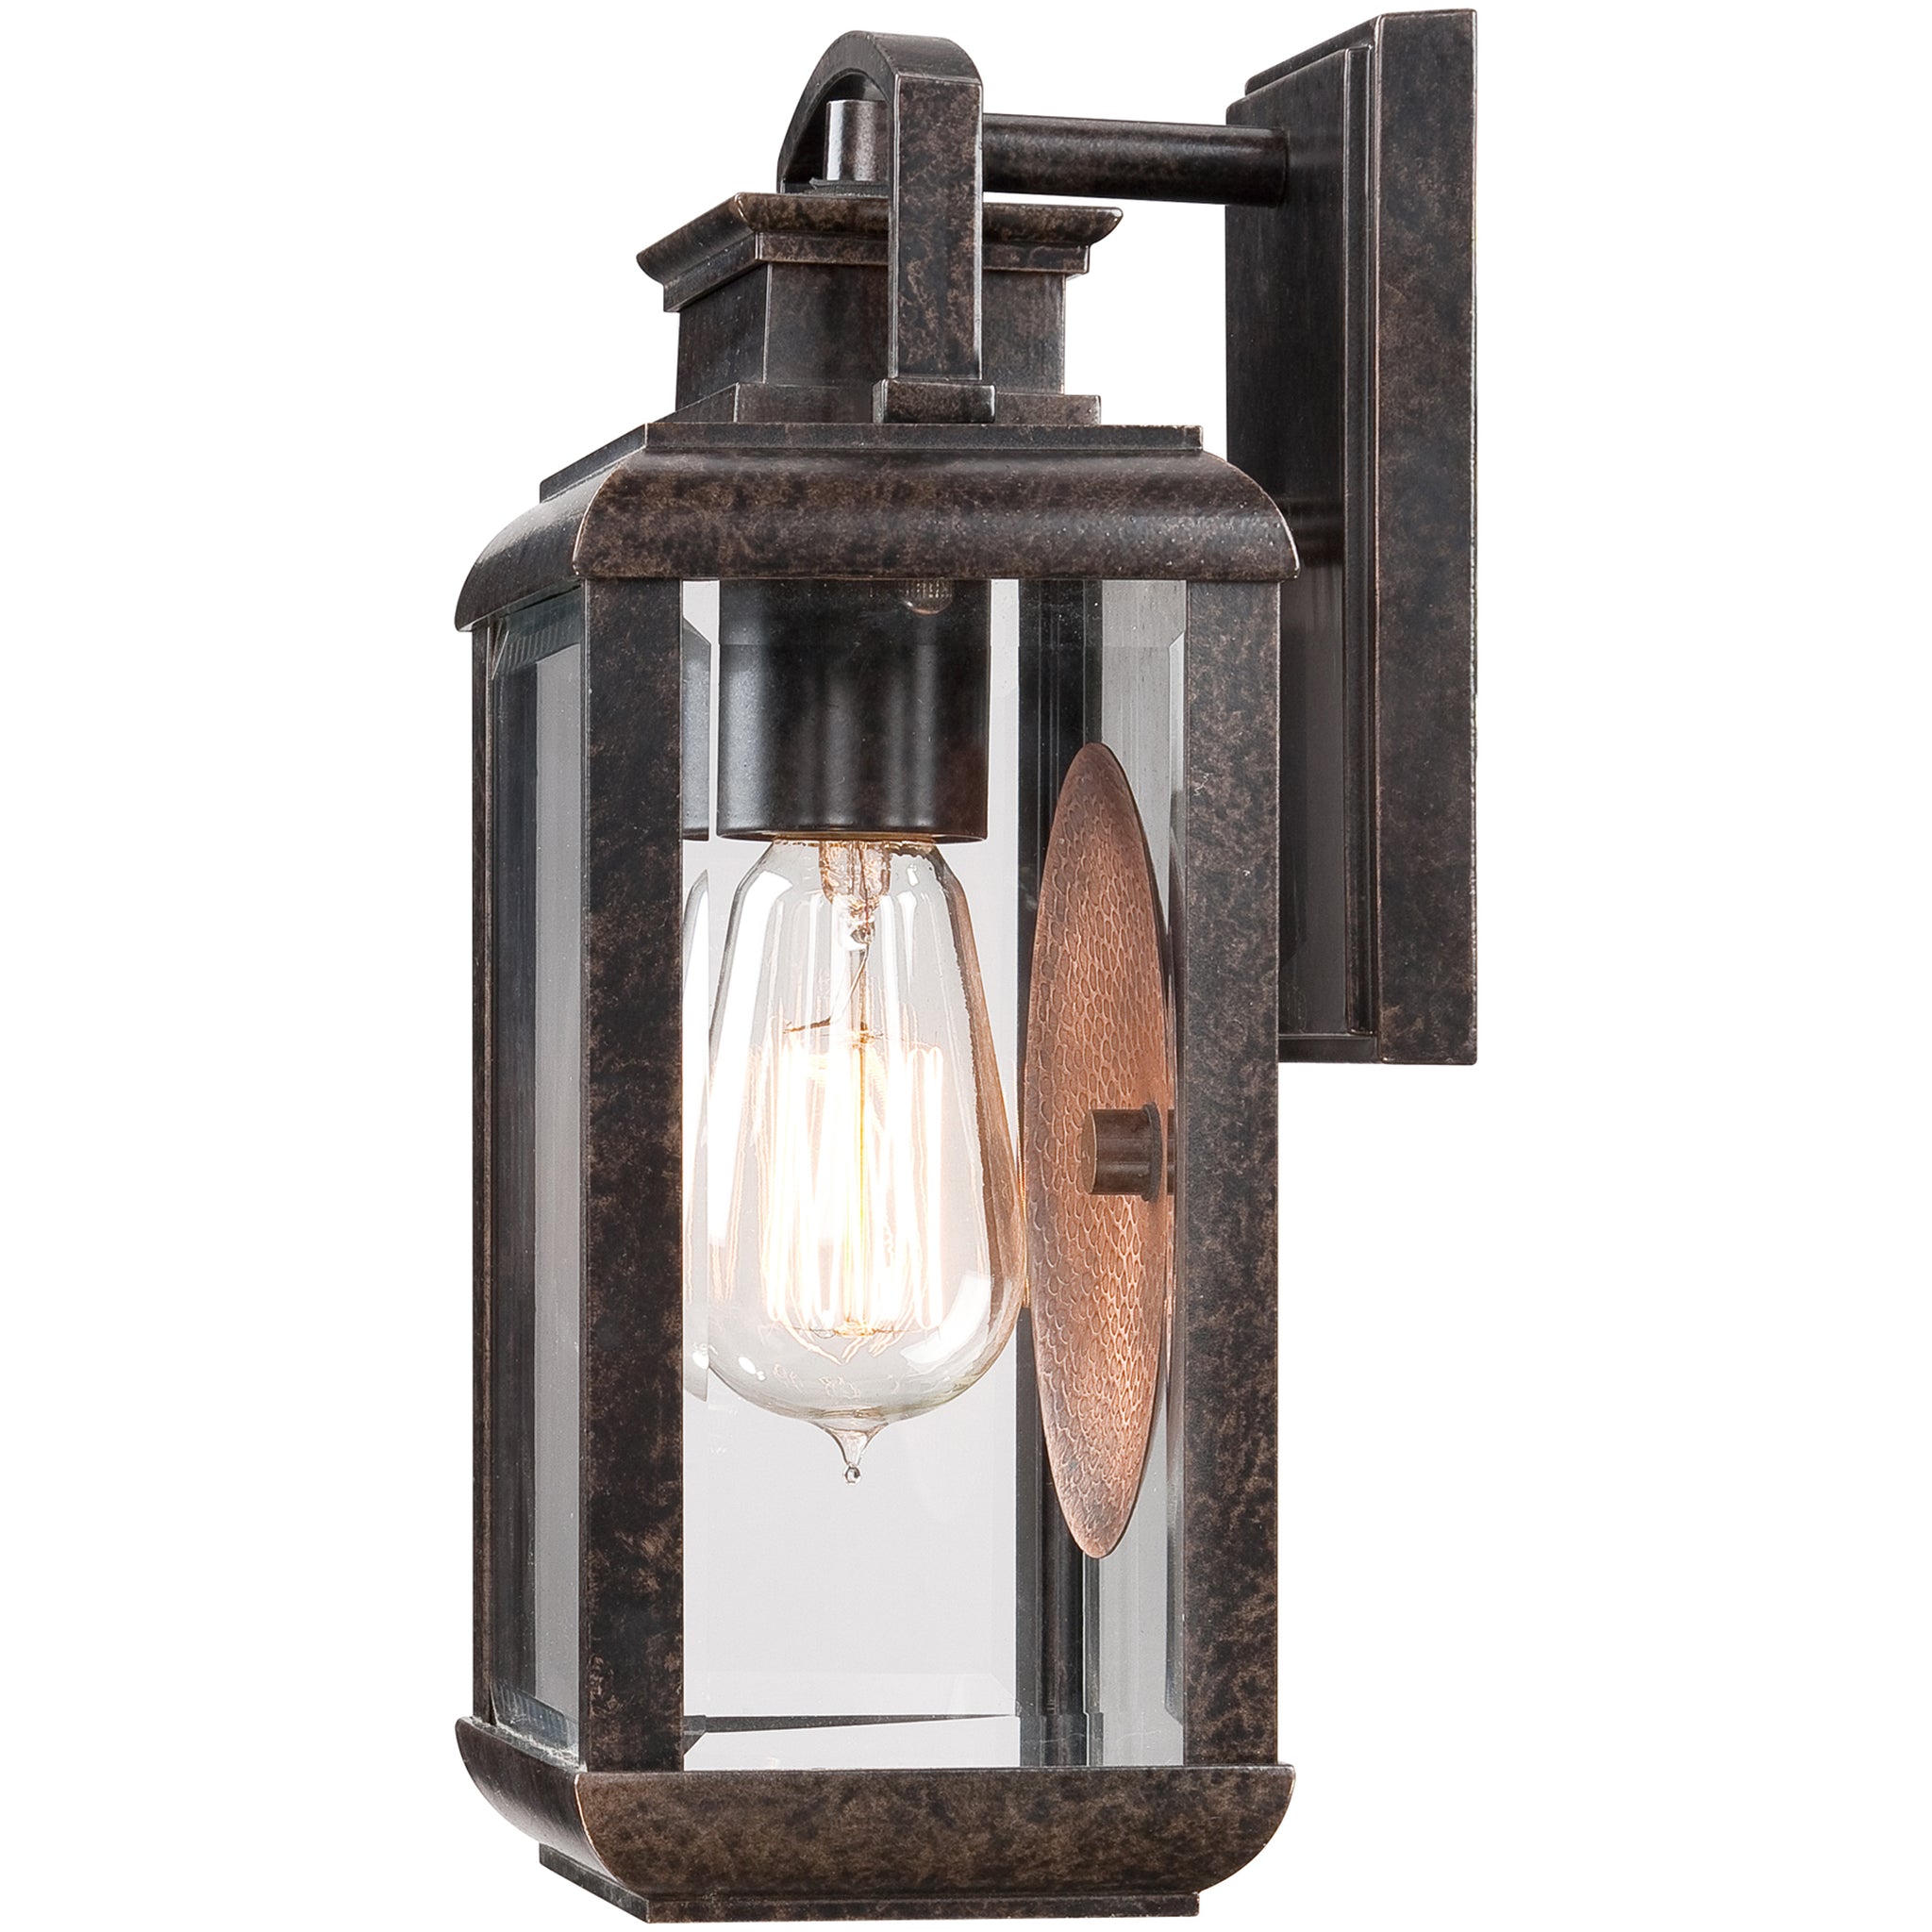 Byron Outdoor Wall Light Imperial Bronze